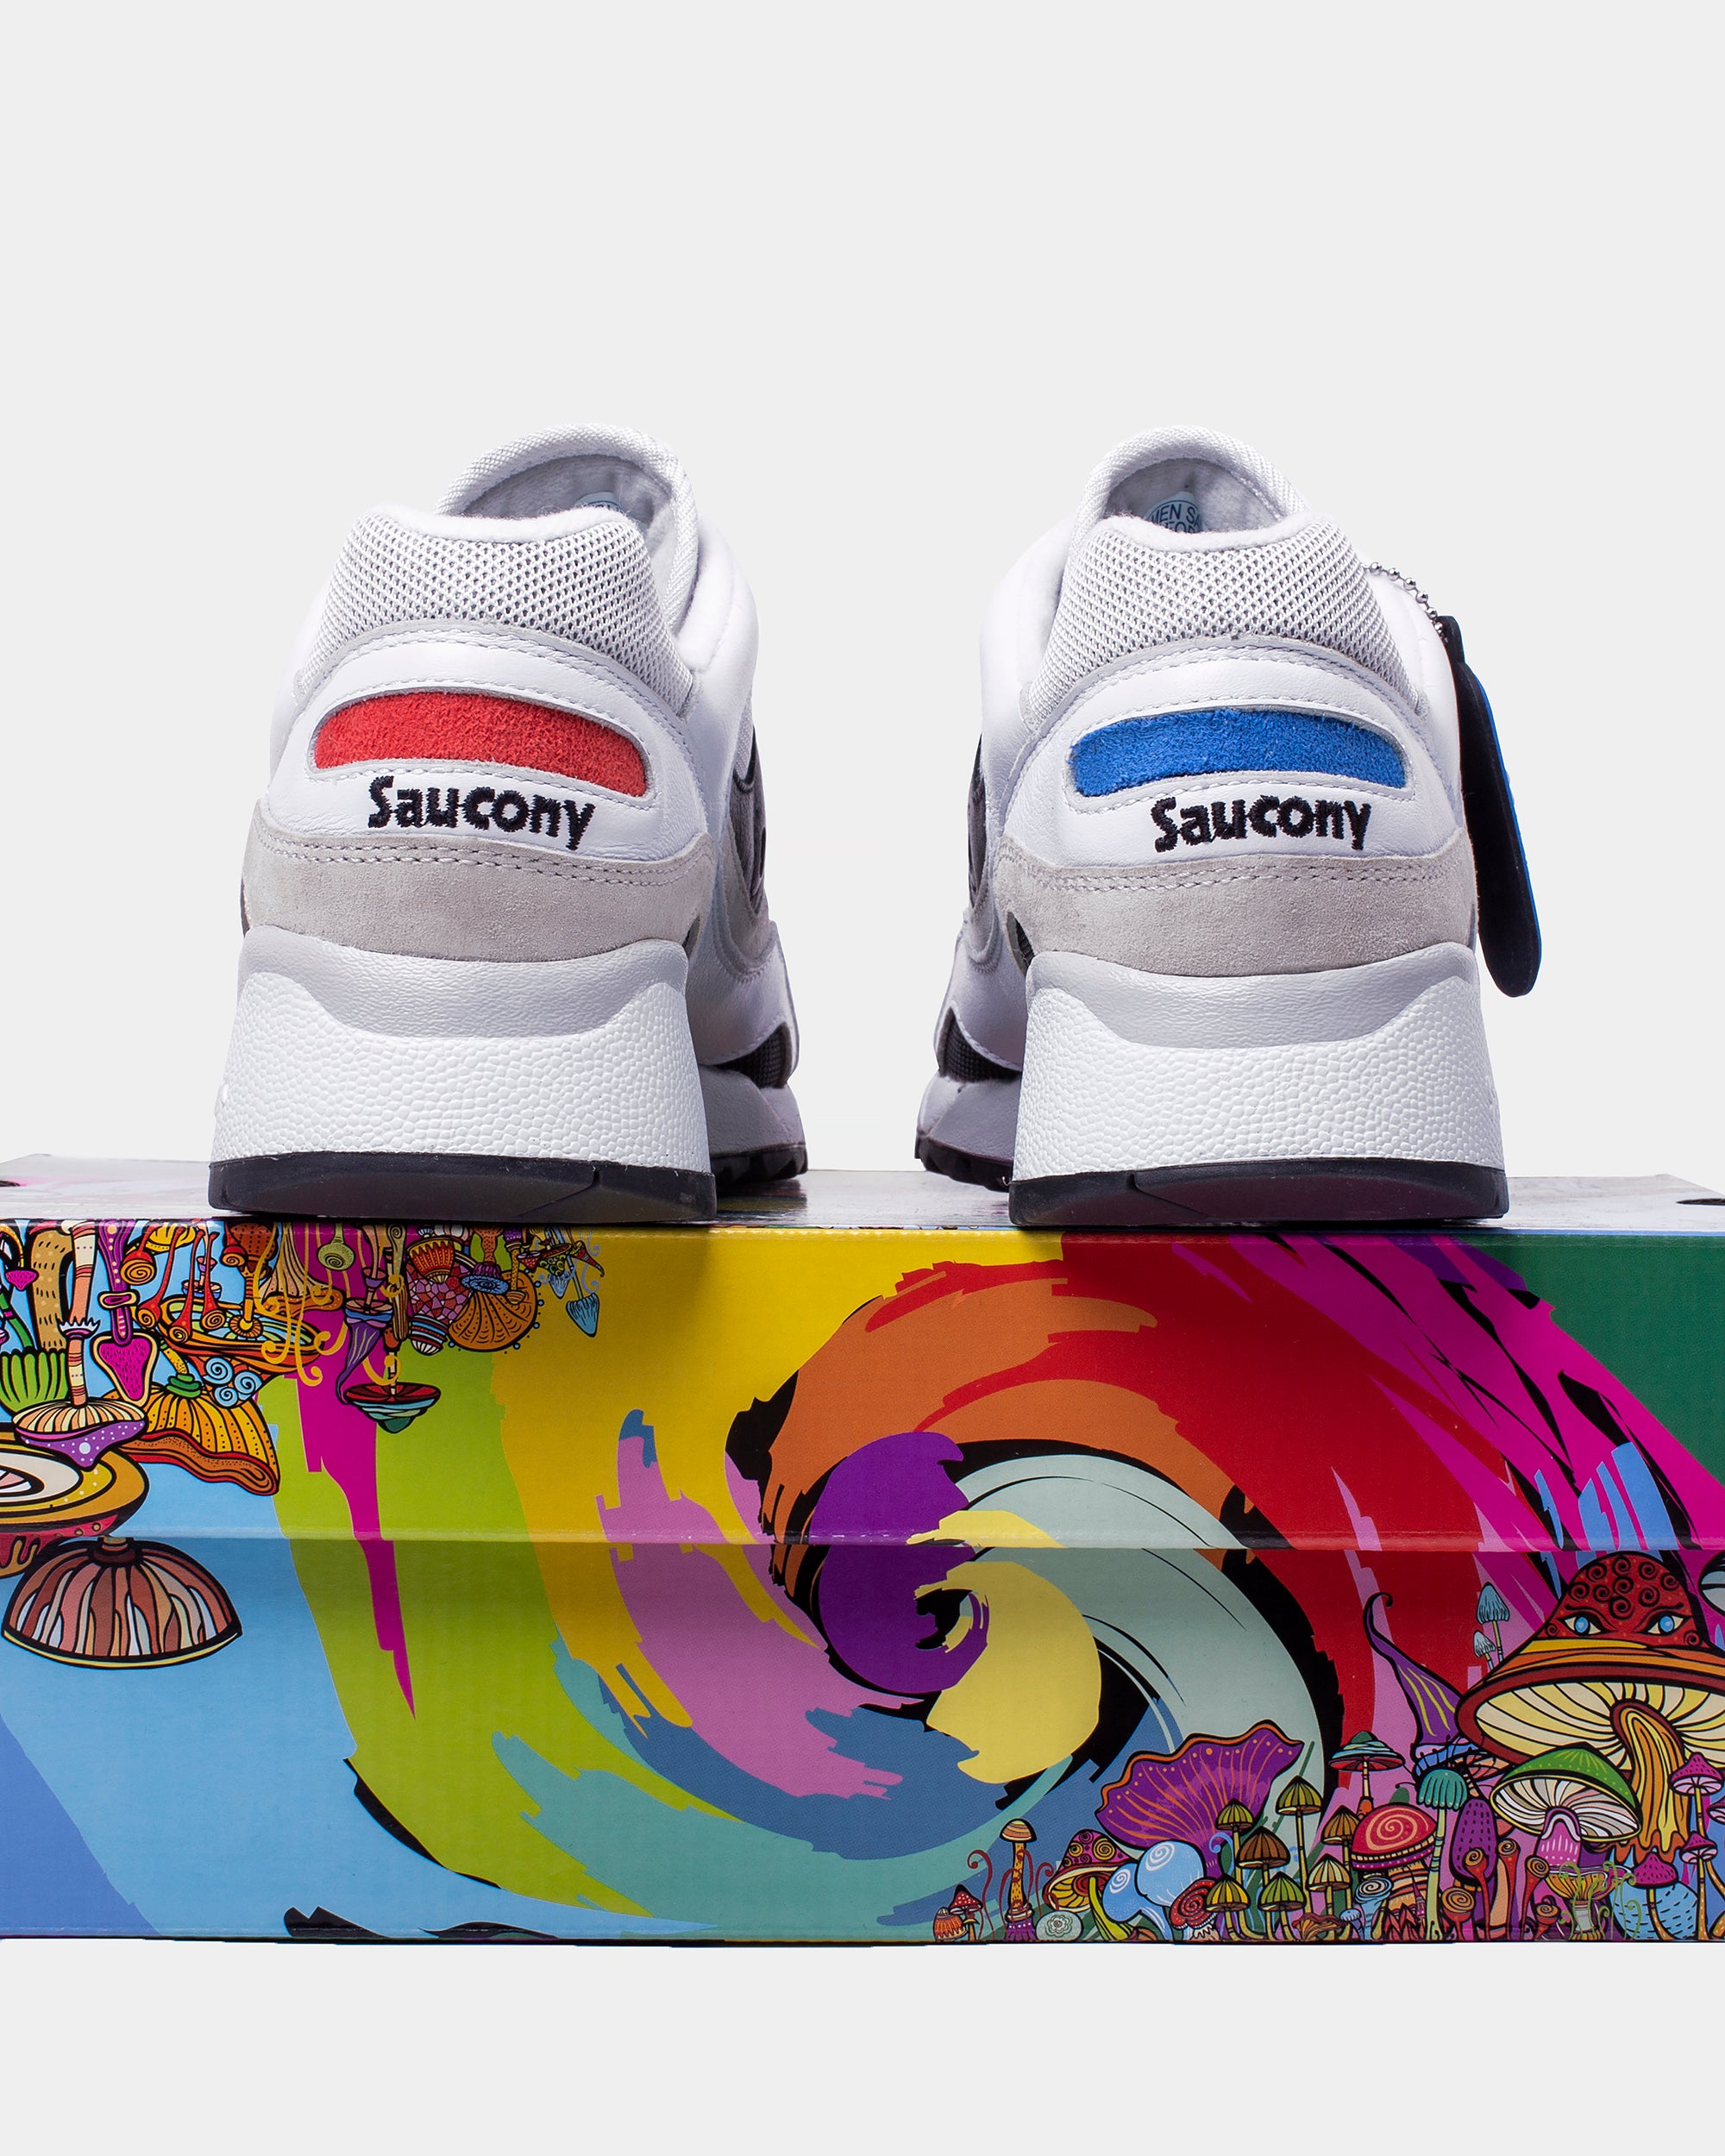 Extra Butter x Saucony Originals 'White Rabbit' Shadow 6000 article image